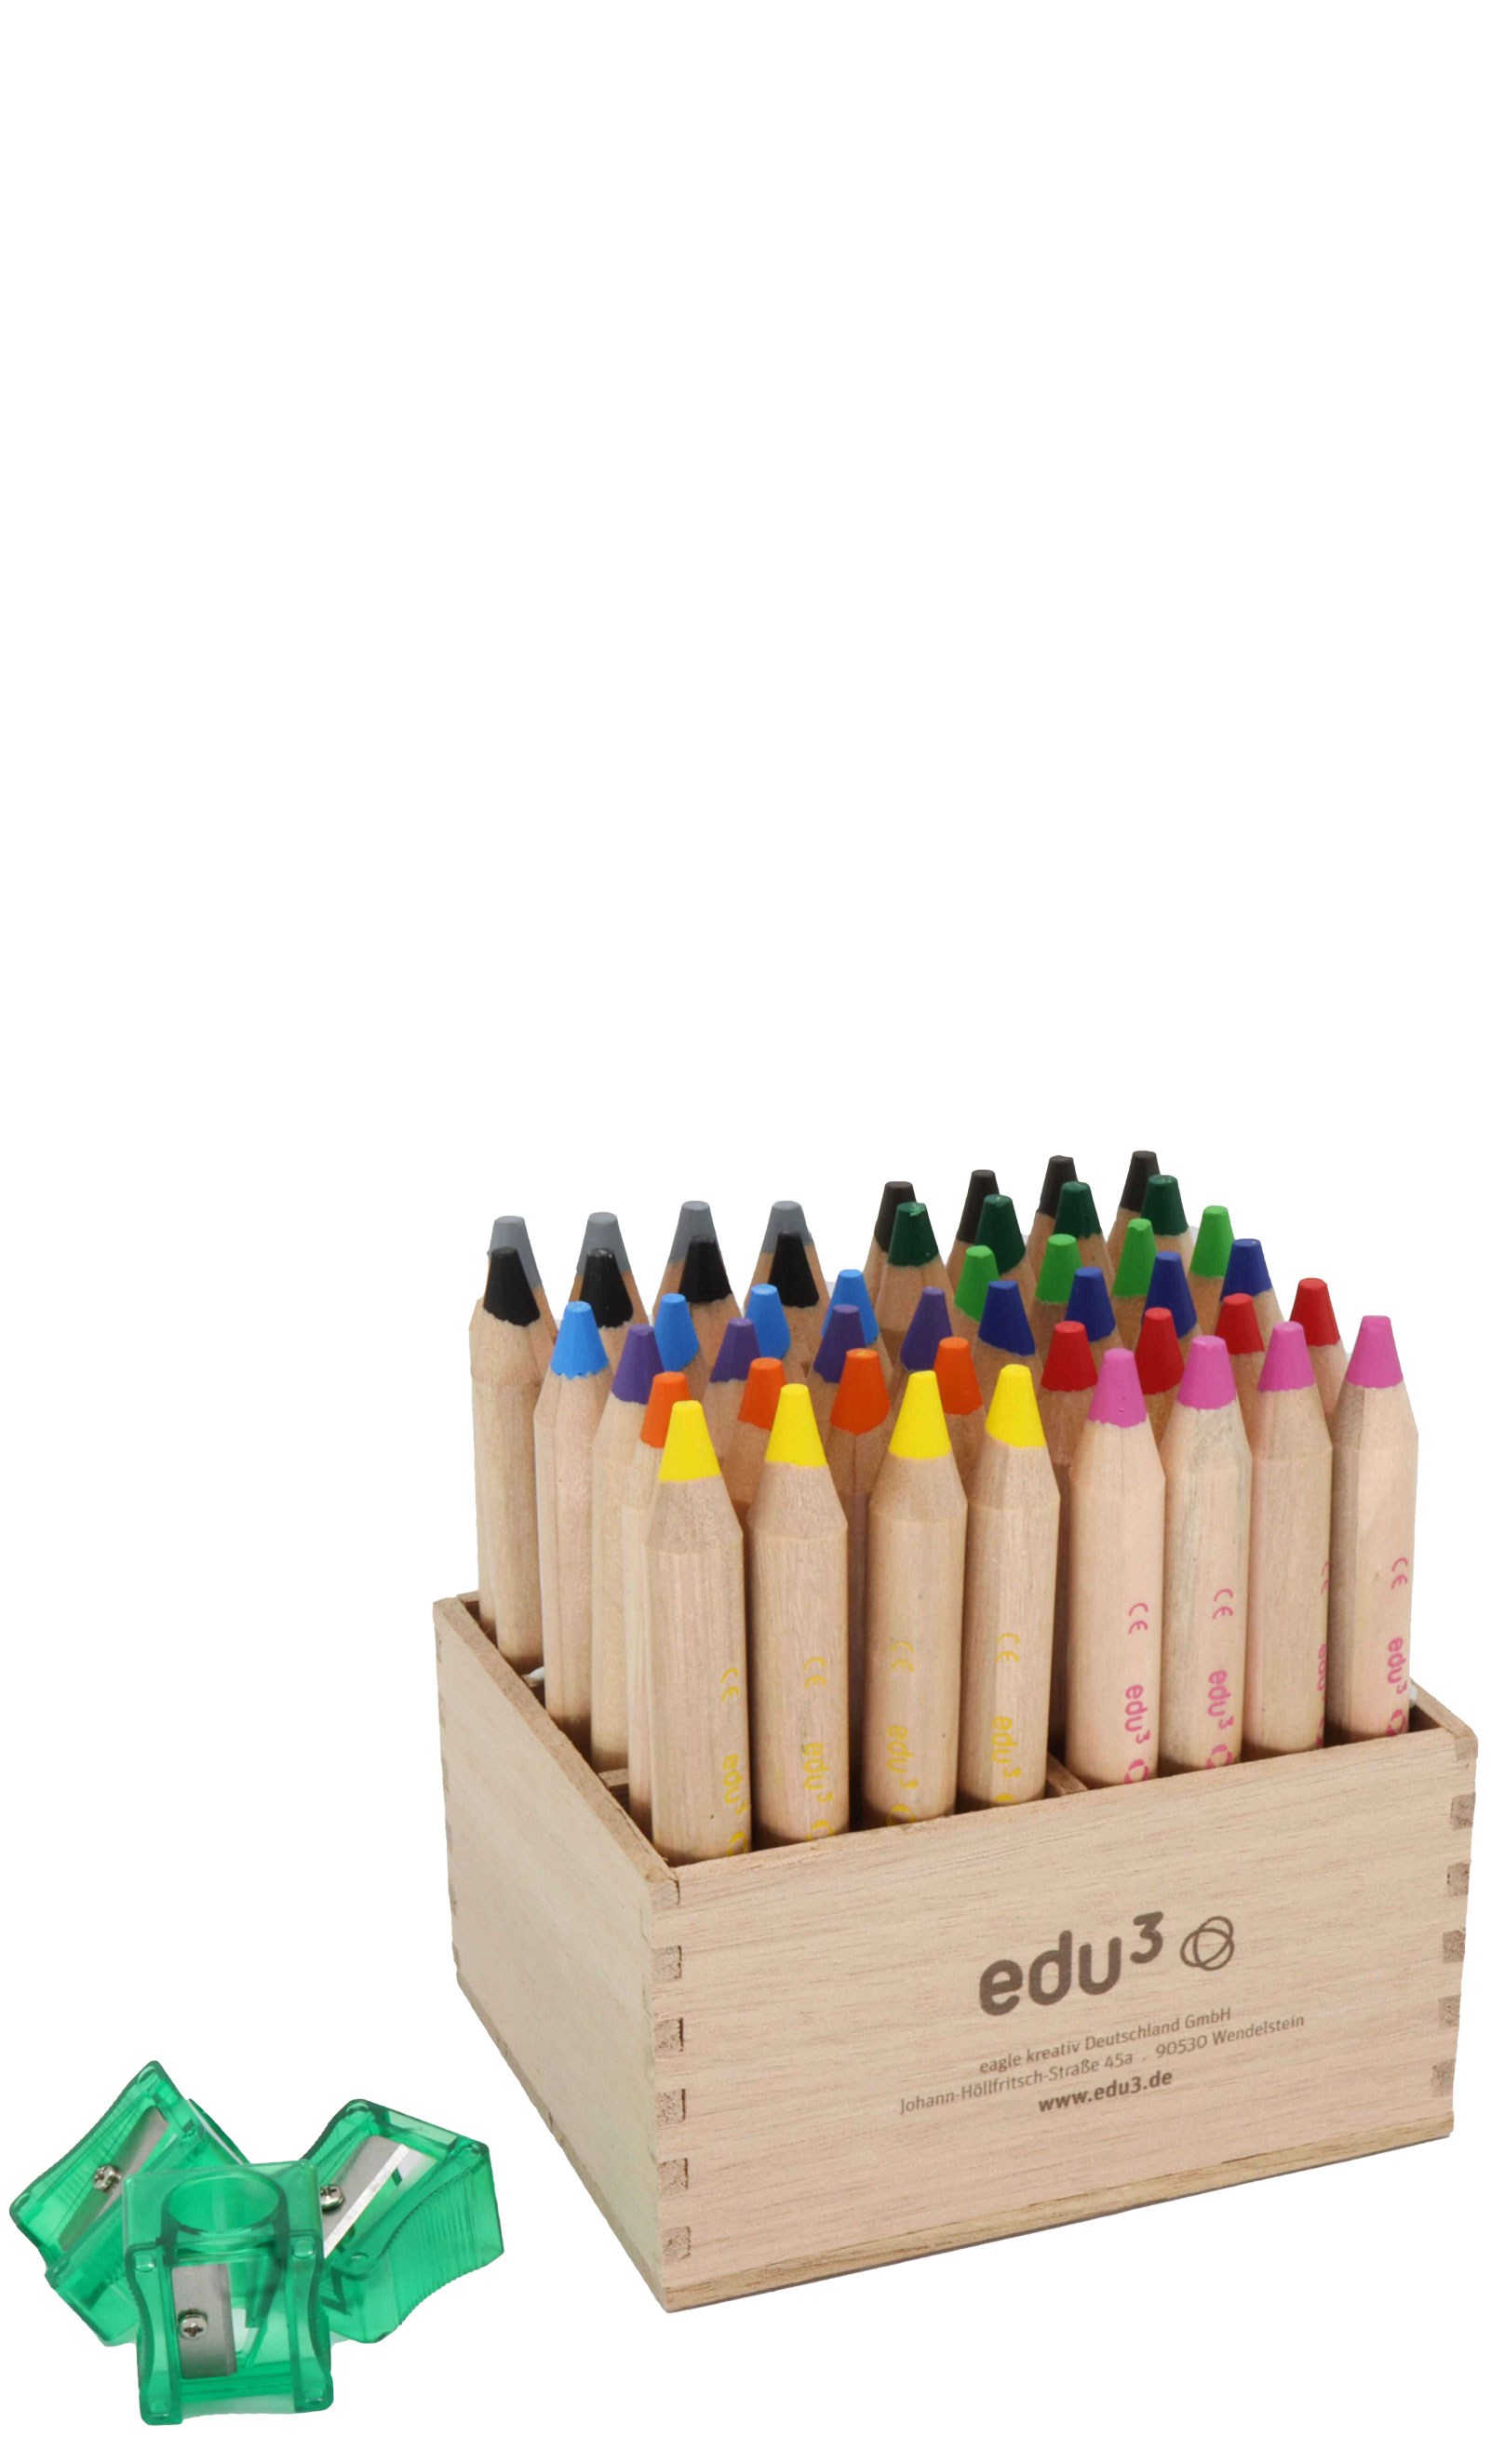 edufirst colored pencils wooden display